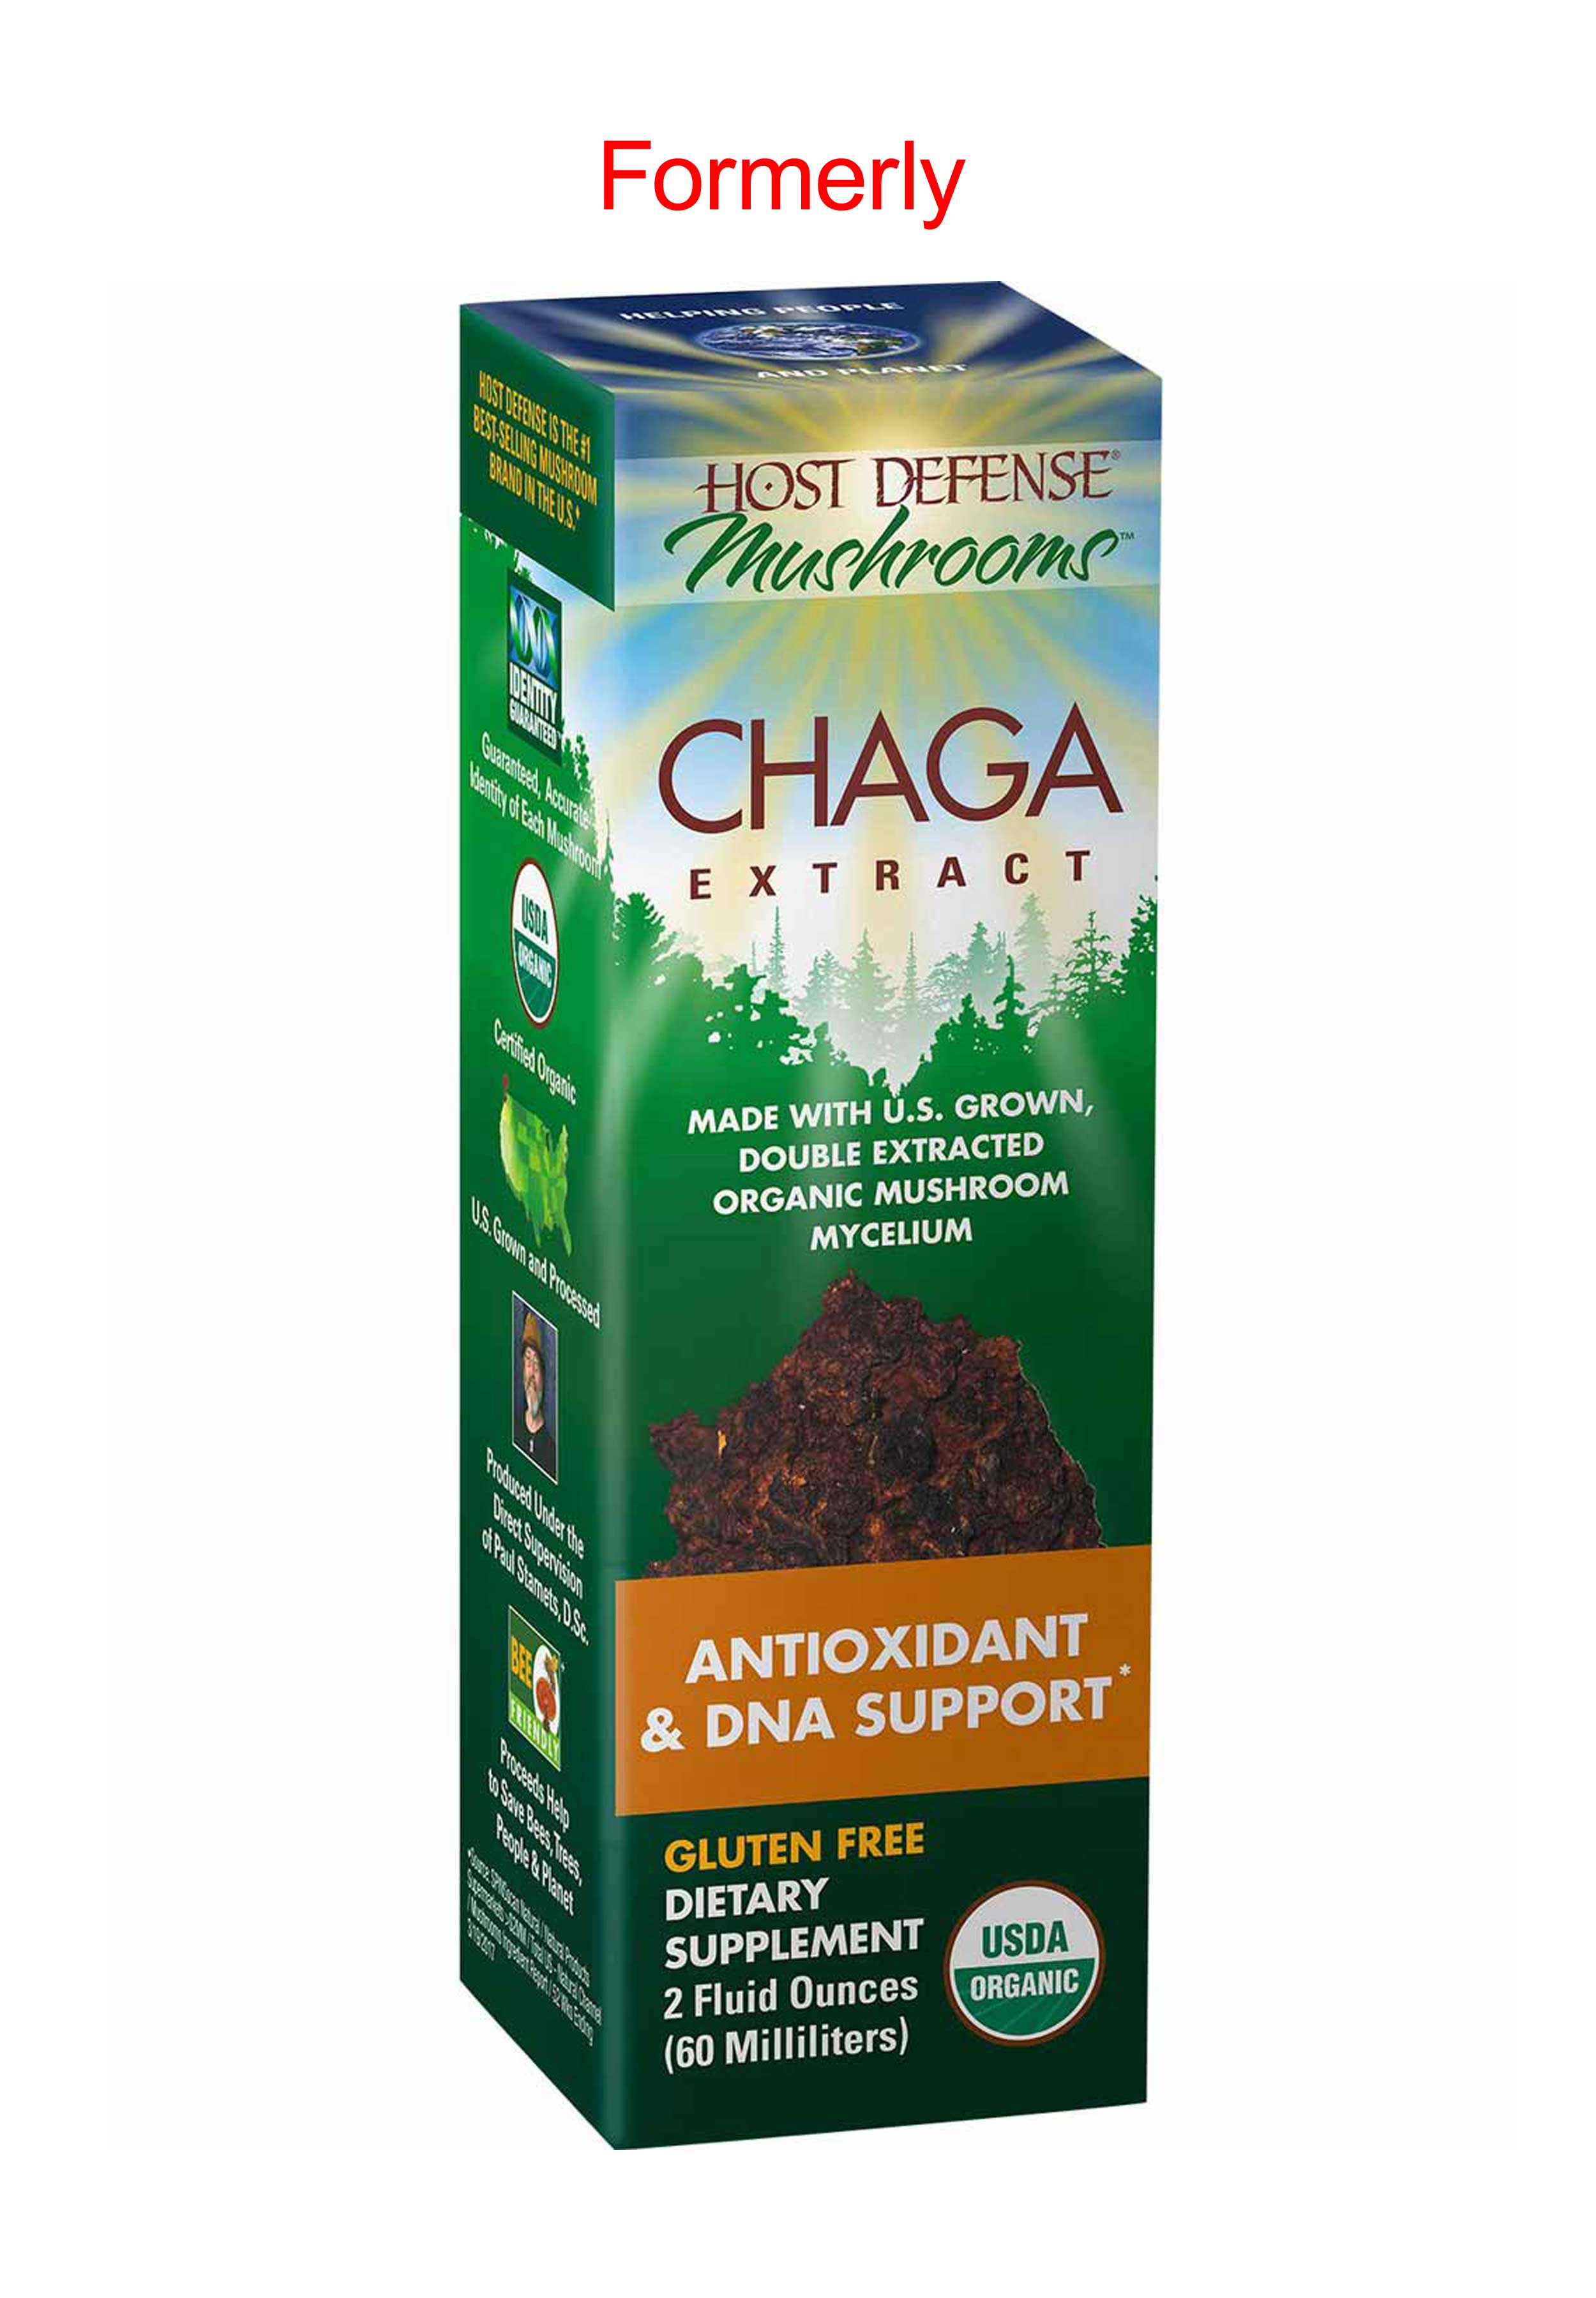 Host Defense Chaga Extract Formerly